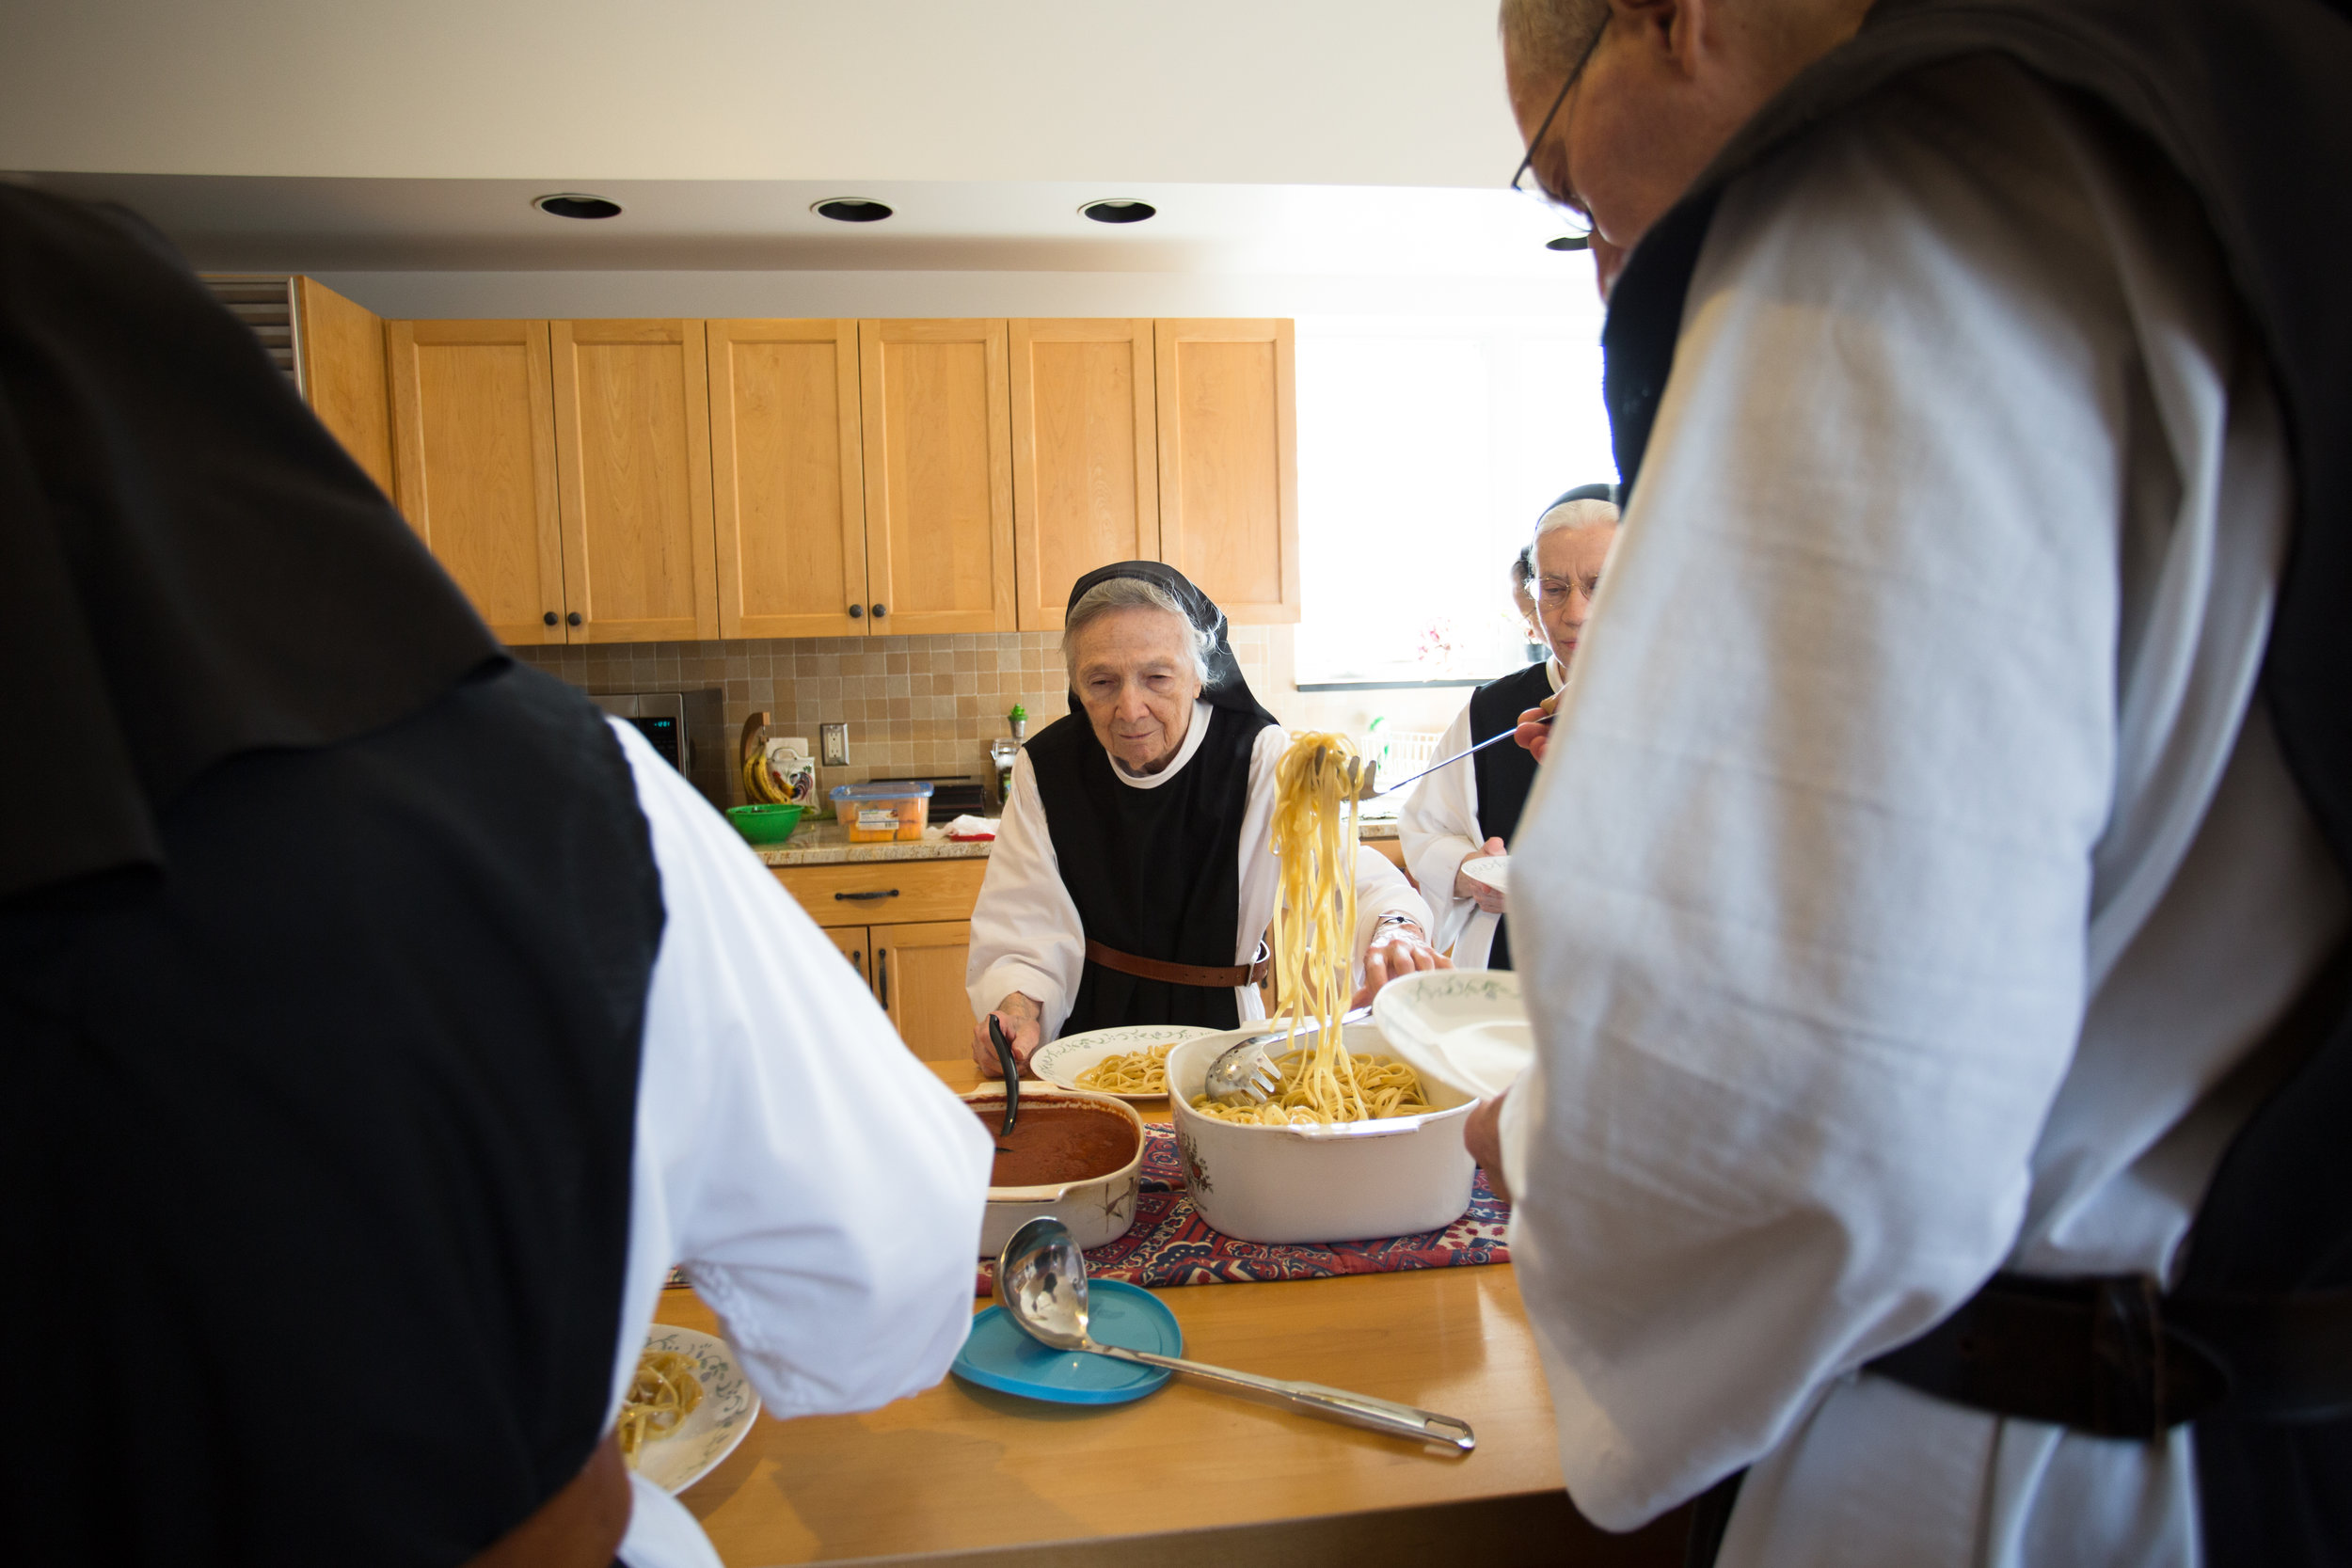  Sister Claire dishes out spaghetti sauce before supper. The sisters eat family style because it is another way to emphasize community and sharing of blessings. Their Gouda cheese is also served on the table. 